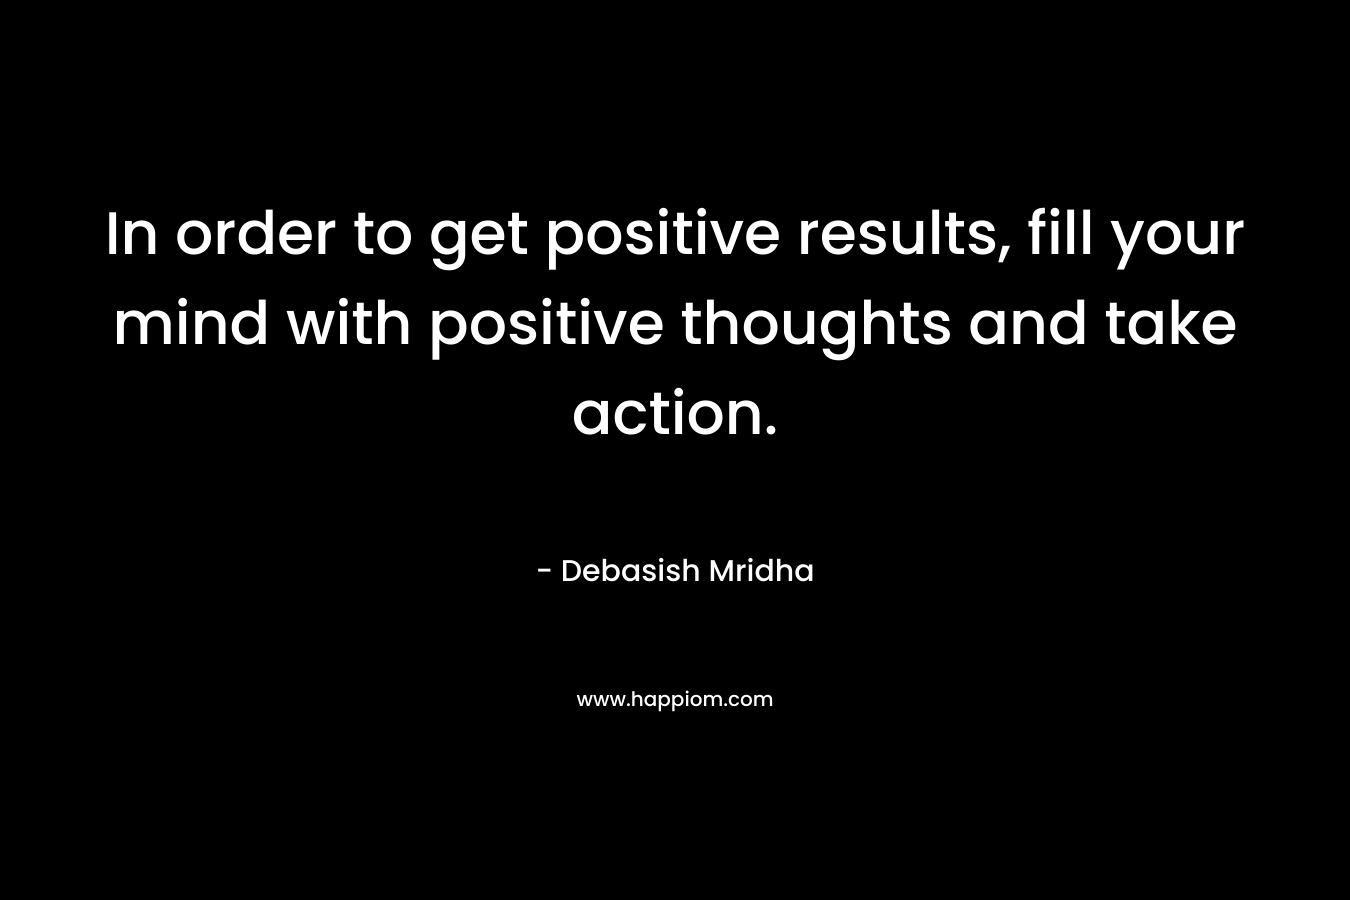 In order to get positive results, fill your mind with positive thoughts and take action.